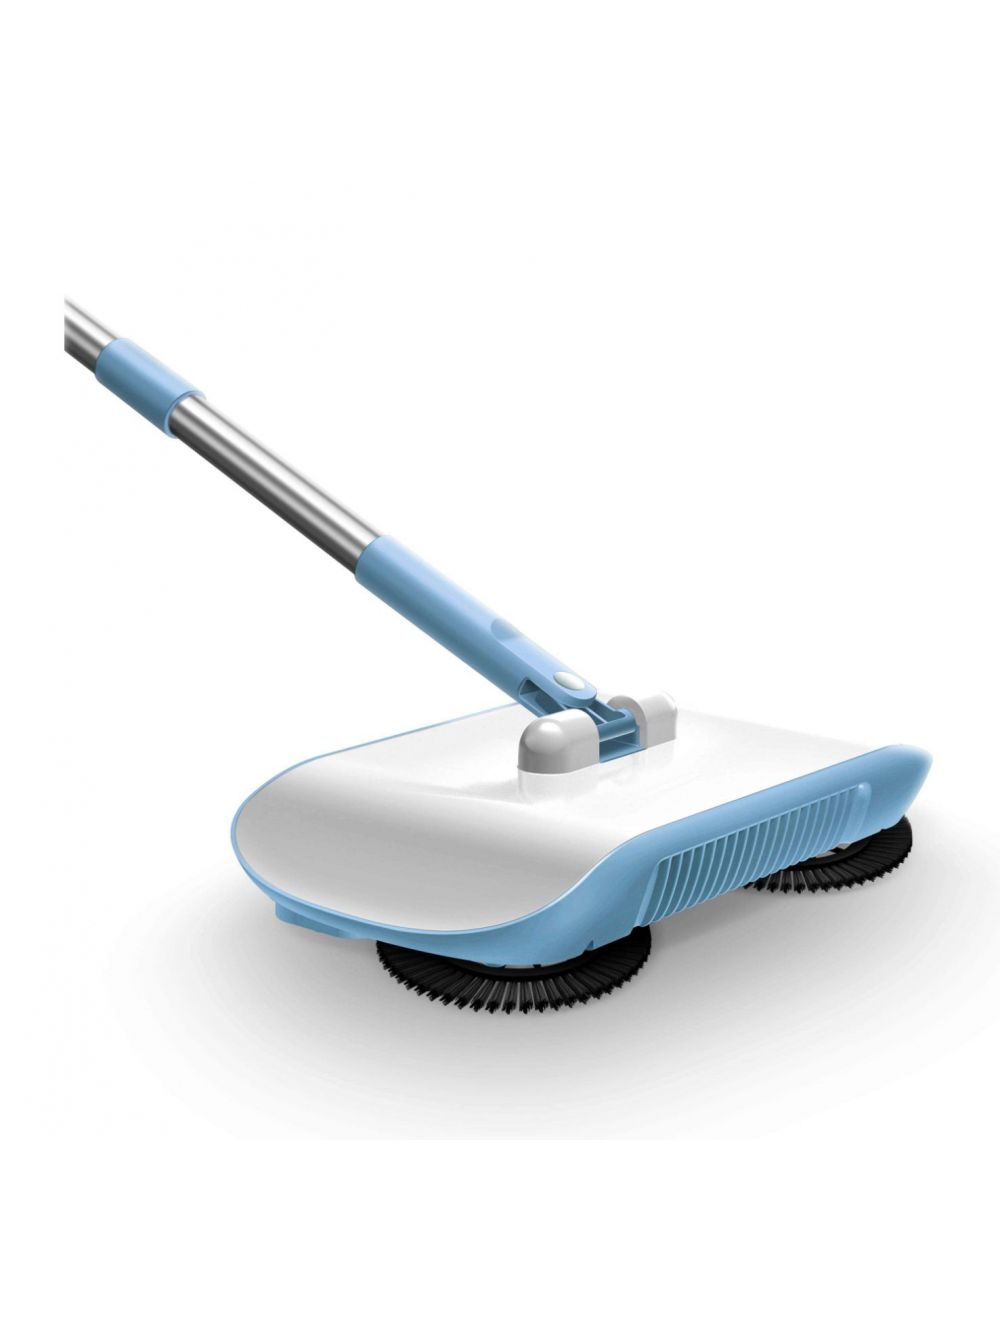 Royalford Auto Sweeper - Hand Push sweeper